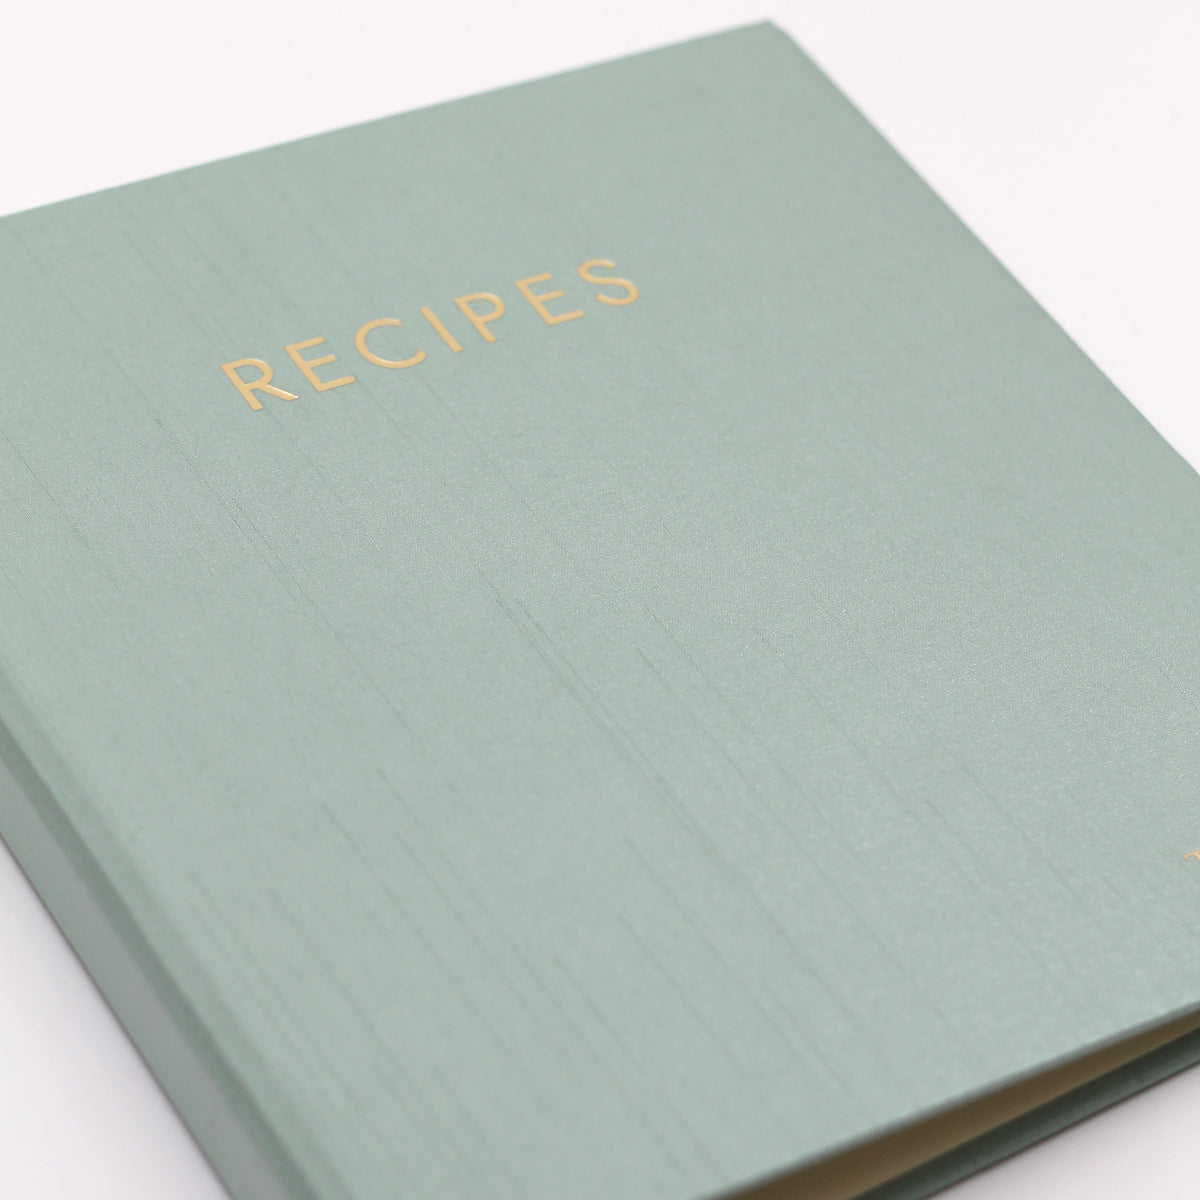 Recipe Journal Embossed with &quot;RECIPES&quot; covered with Misty Blue Silk